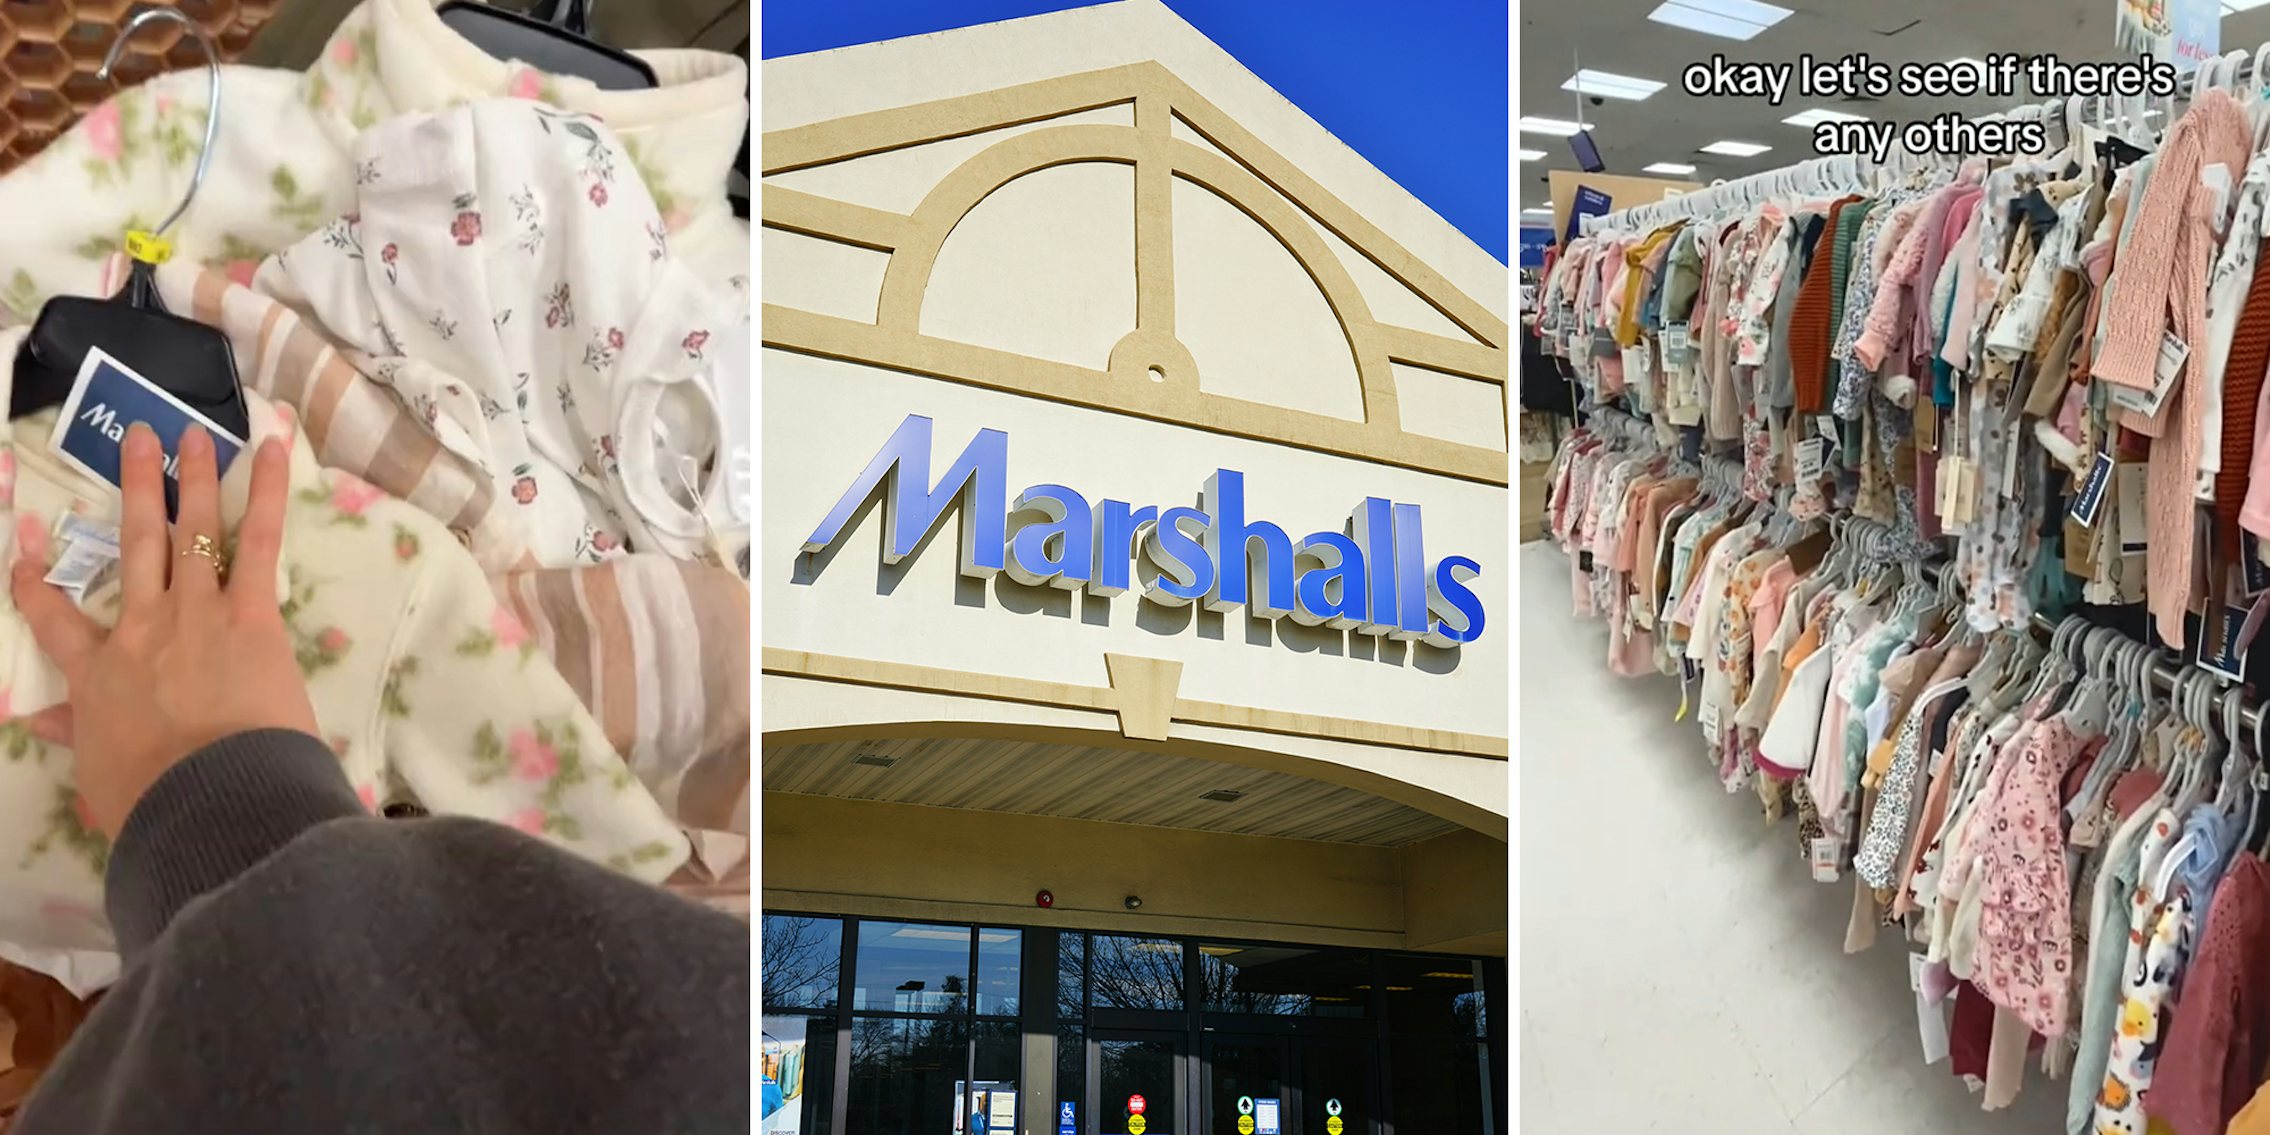 Shopper Shares Hack To Getting Best Quality Clothes at Marshalls